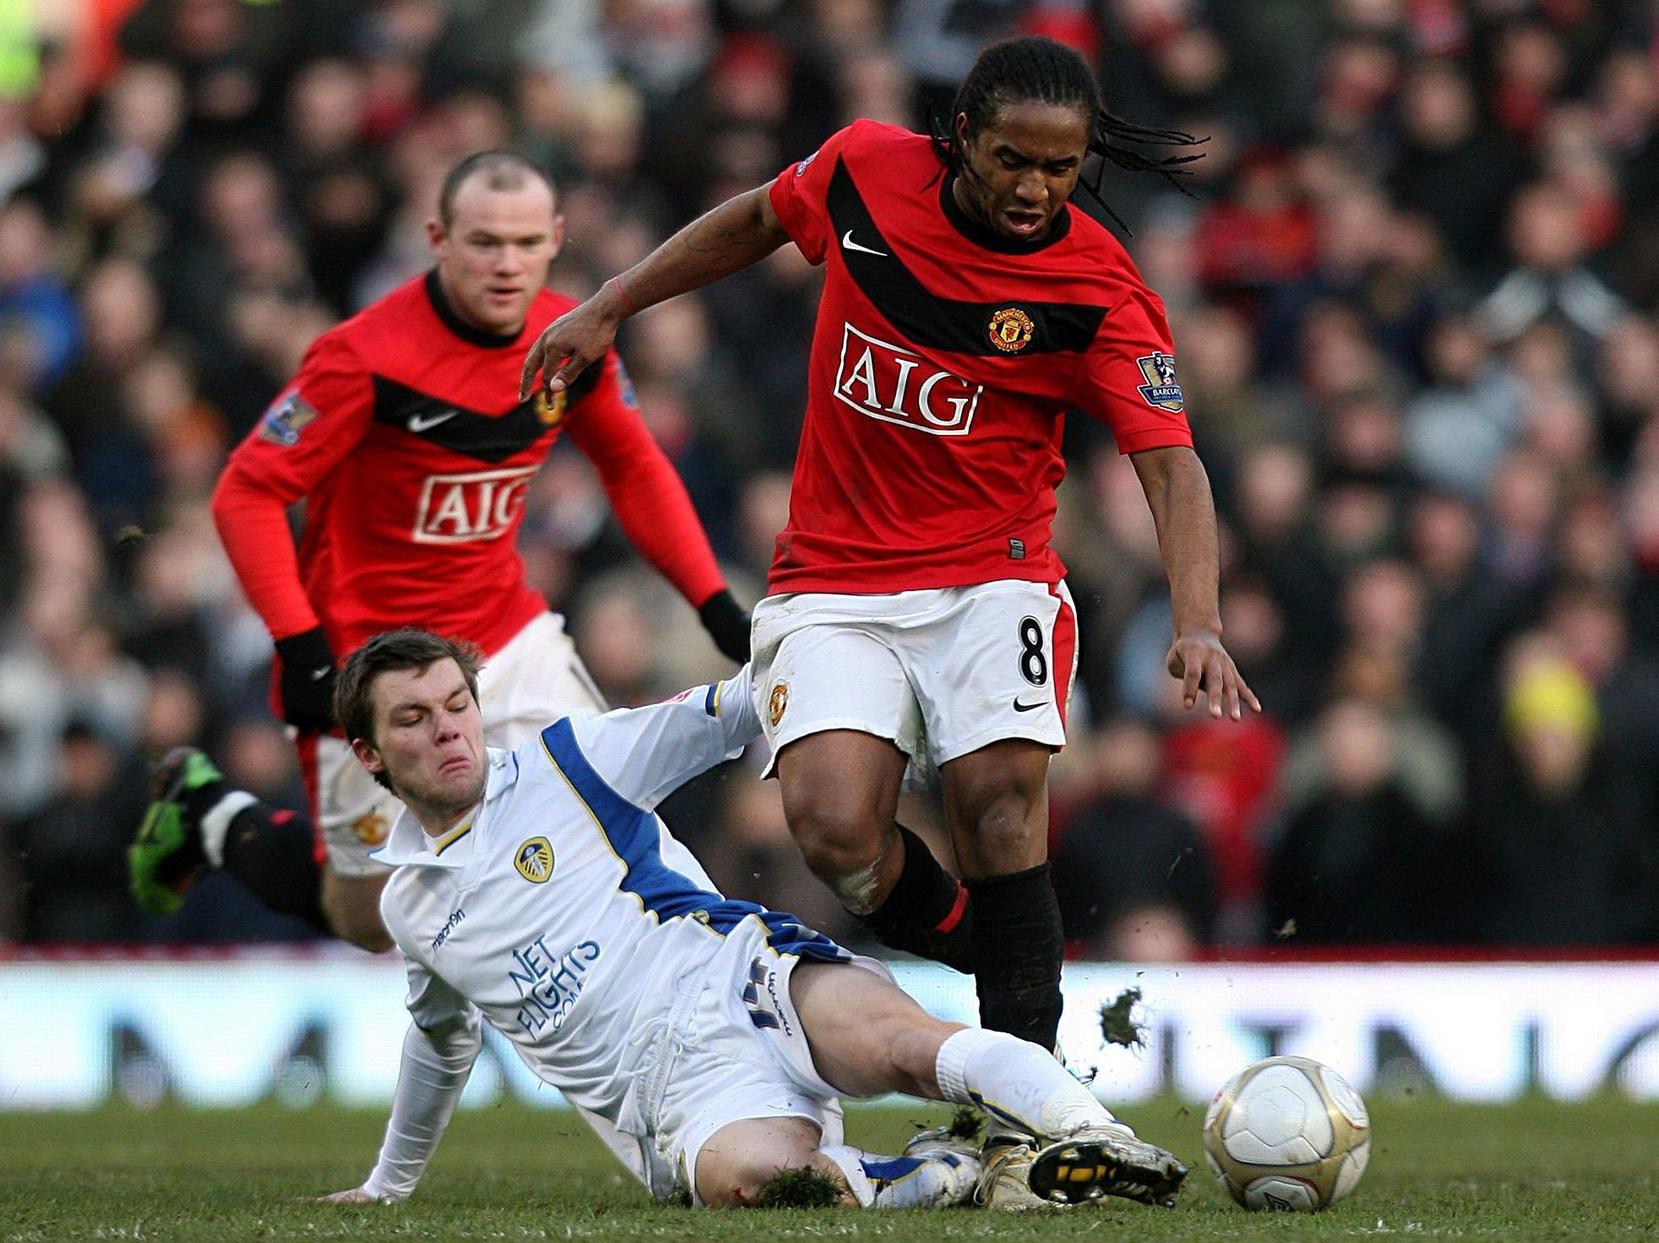 Jonny Howson tackles Manchester United's Oliveira Anderson.